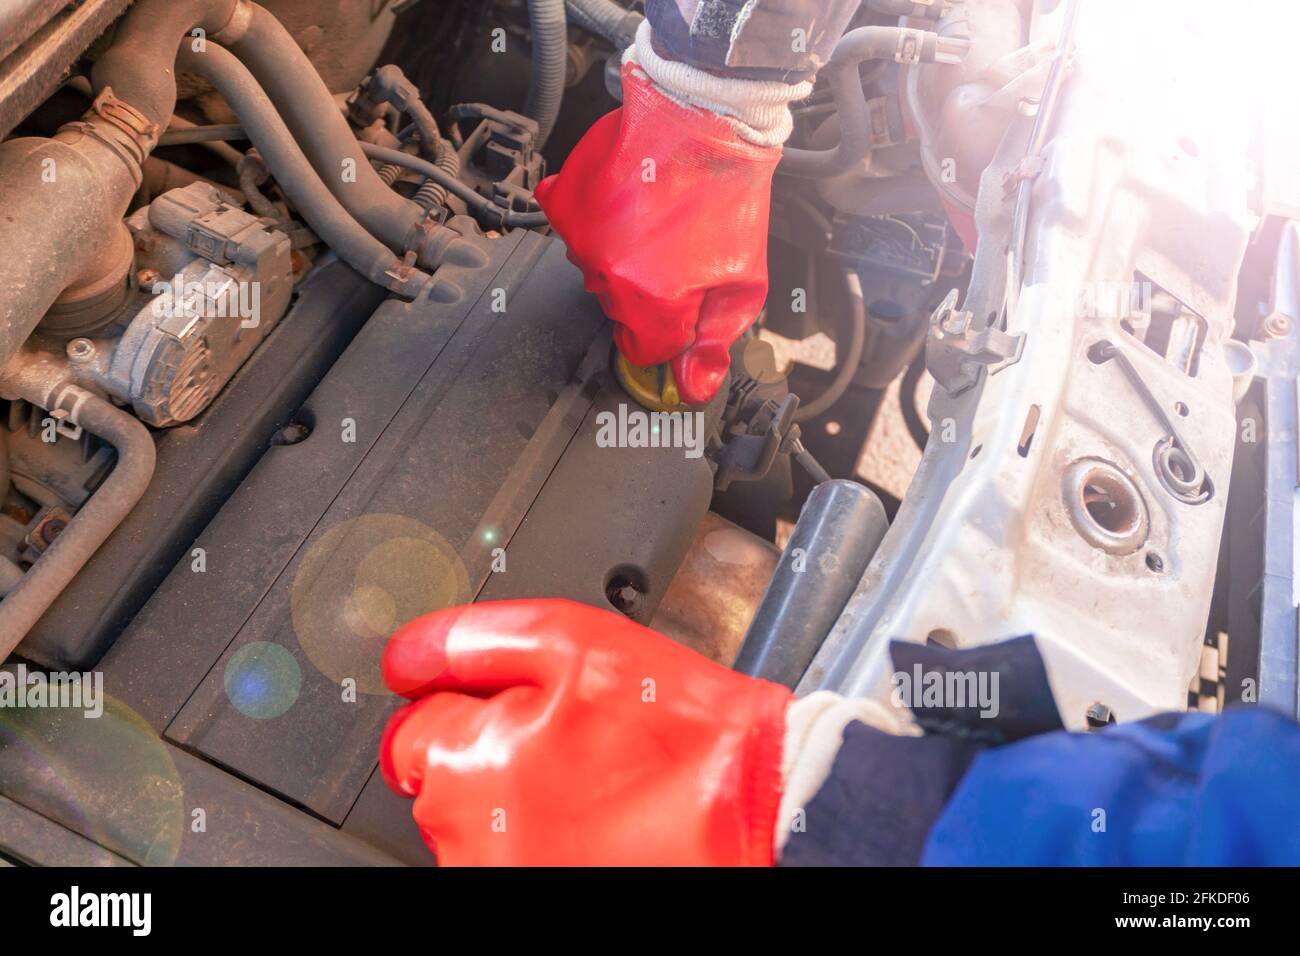 A man in red rubber gloves changes the oil in a car engine. Car repair with the hood up  Stock Photo